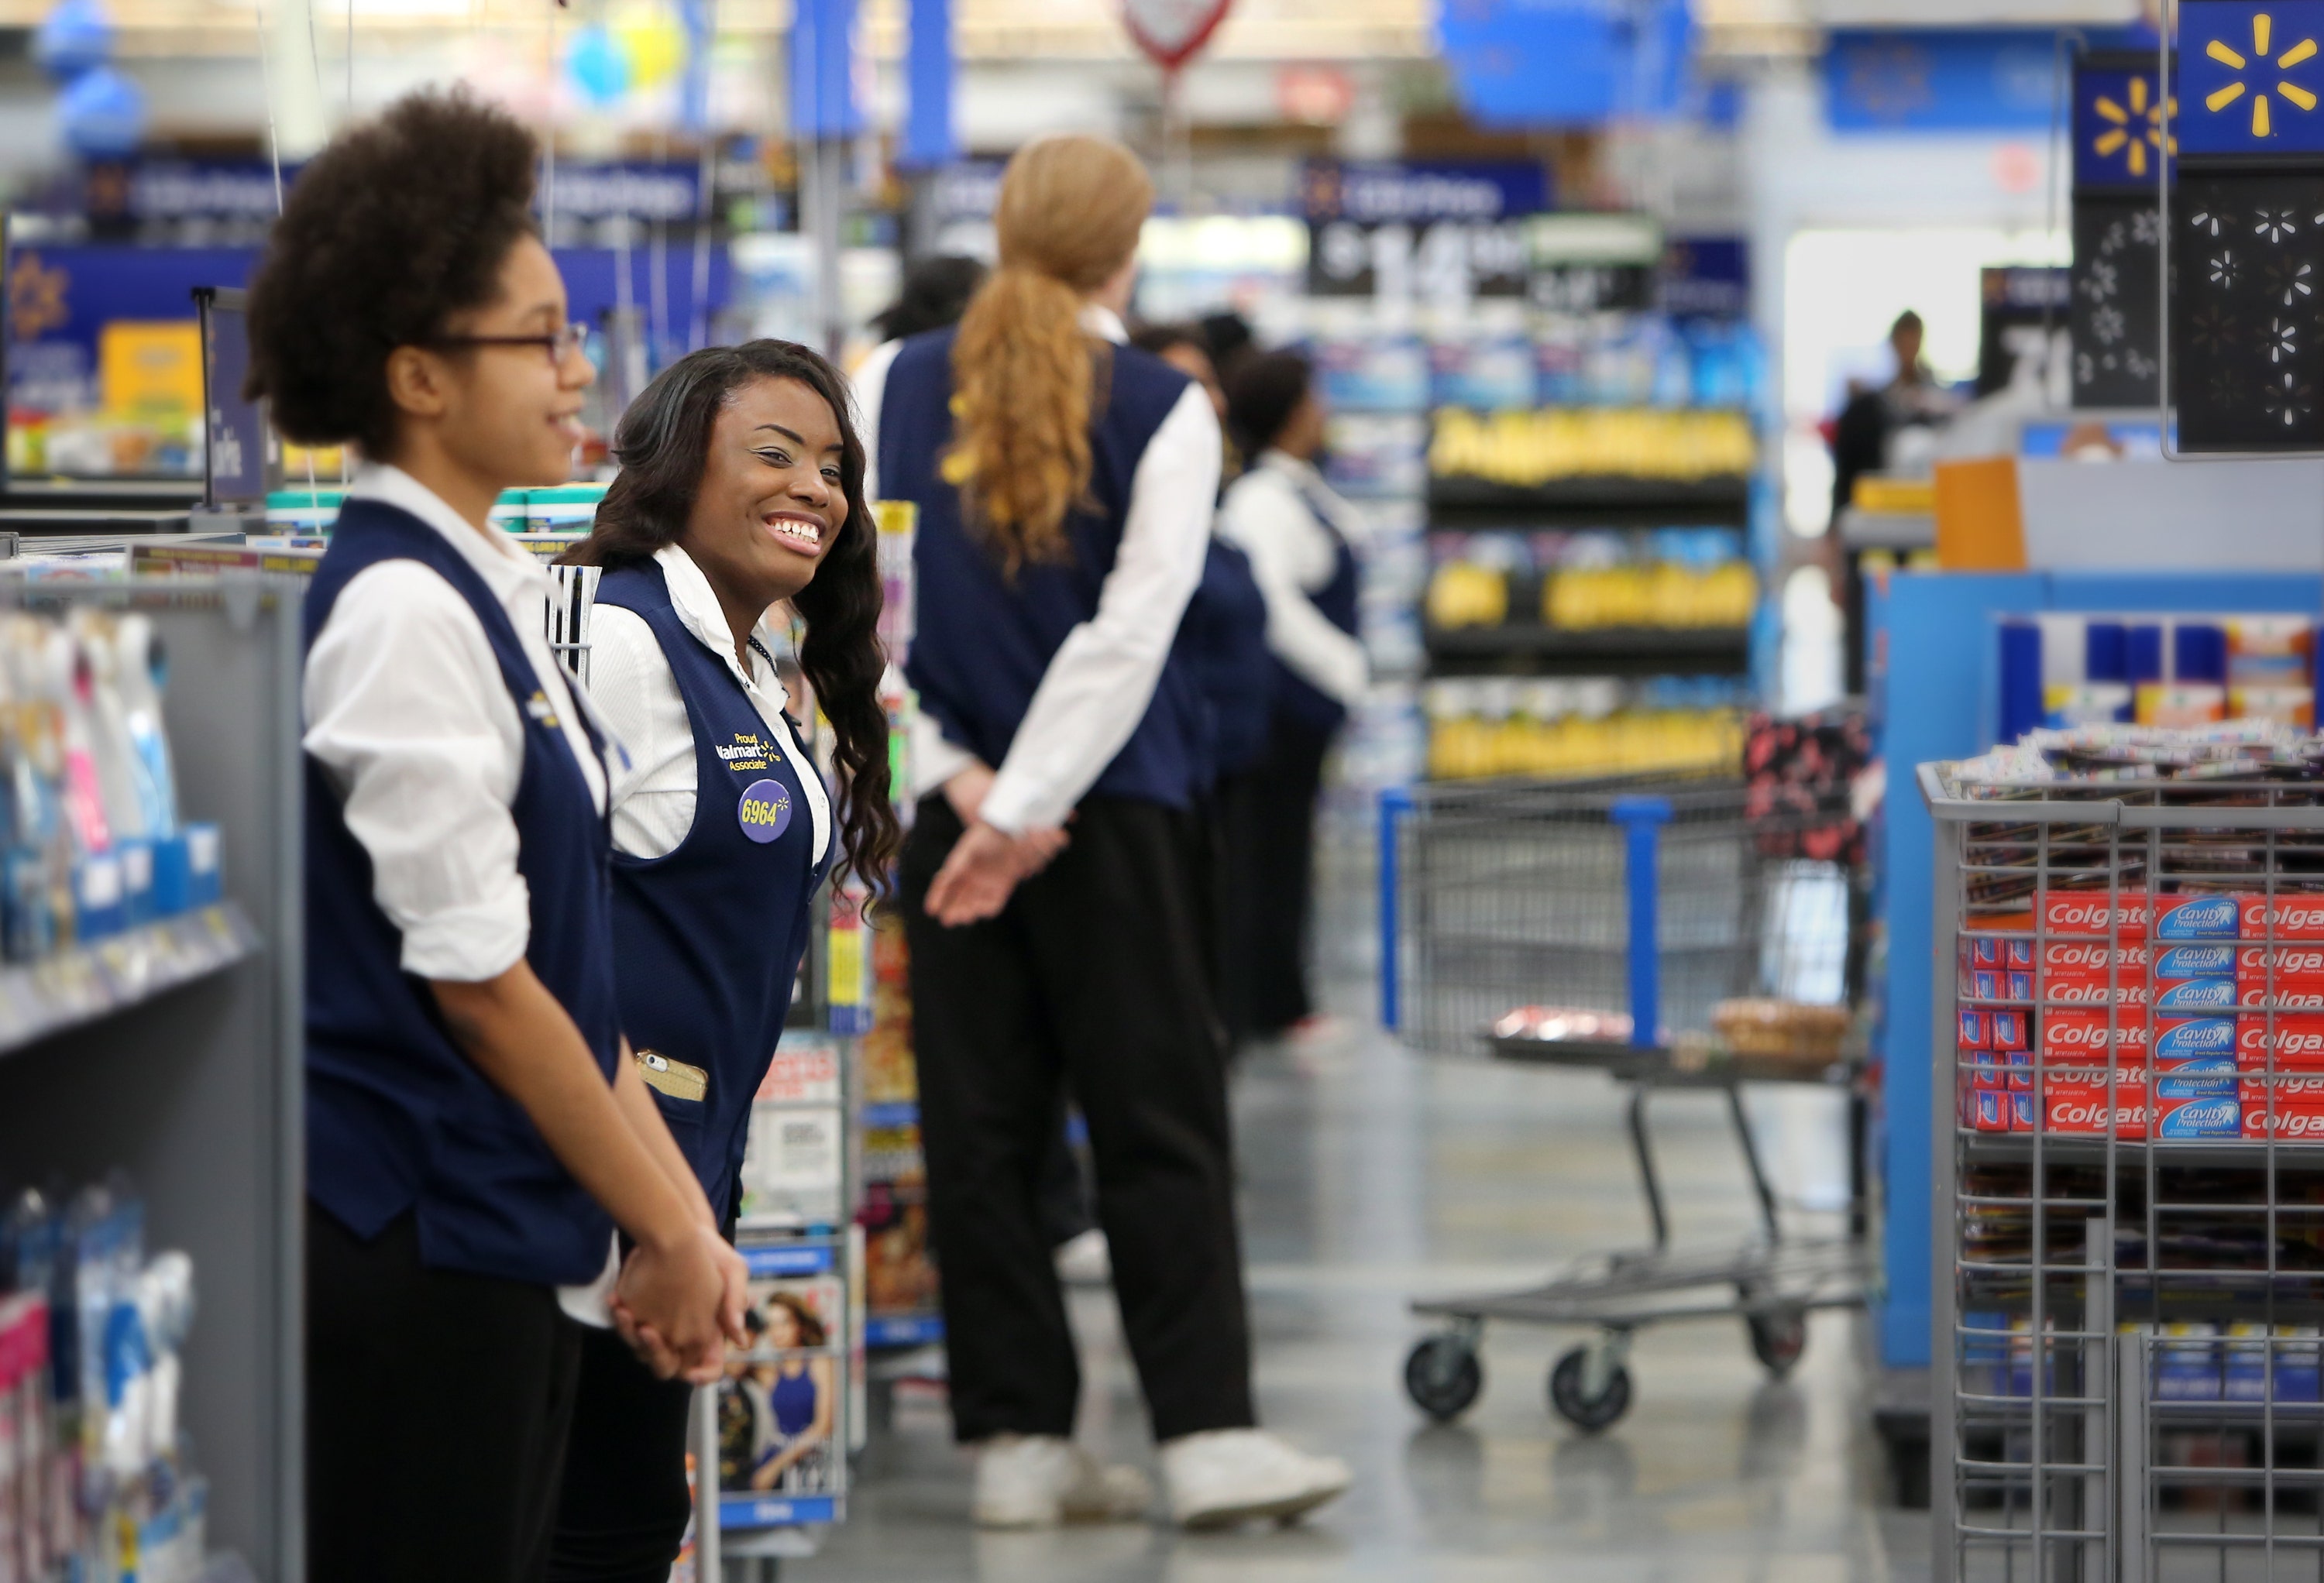 Walmart brings back greeters to most stores Fox News